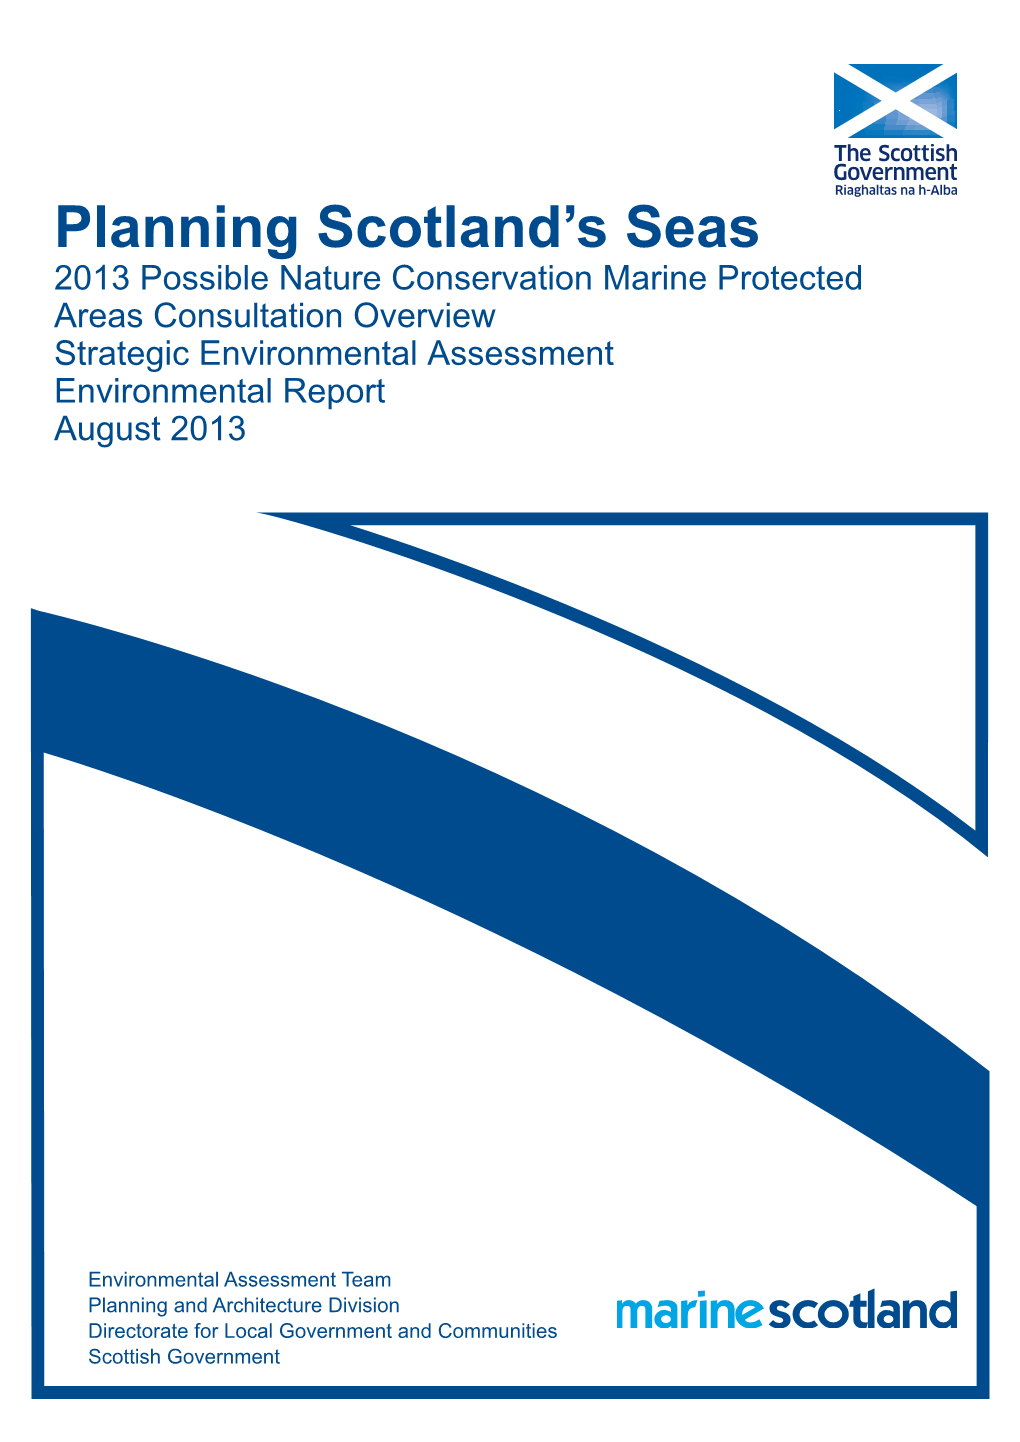 Planning Scotland's Seas 2013 Possible Nature Conservation